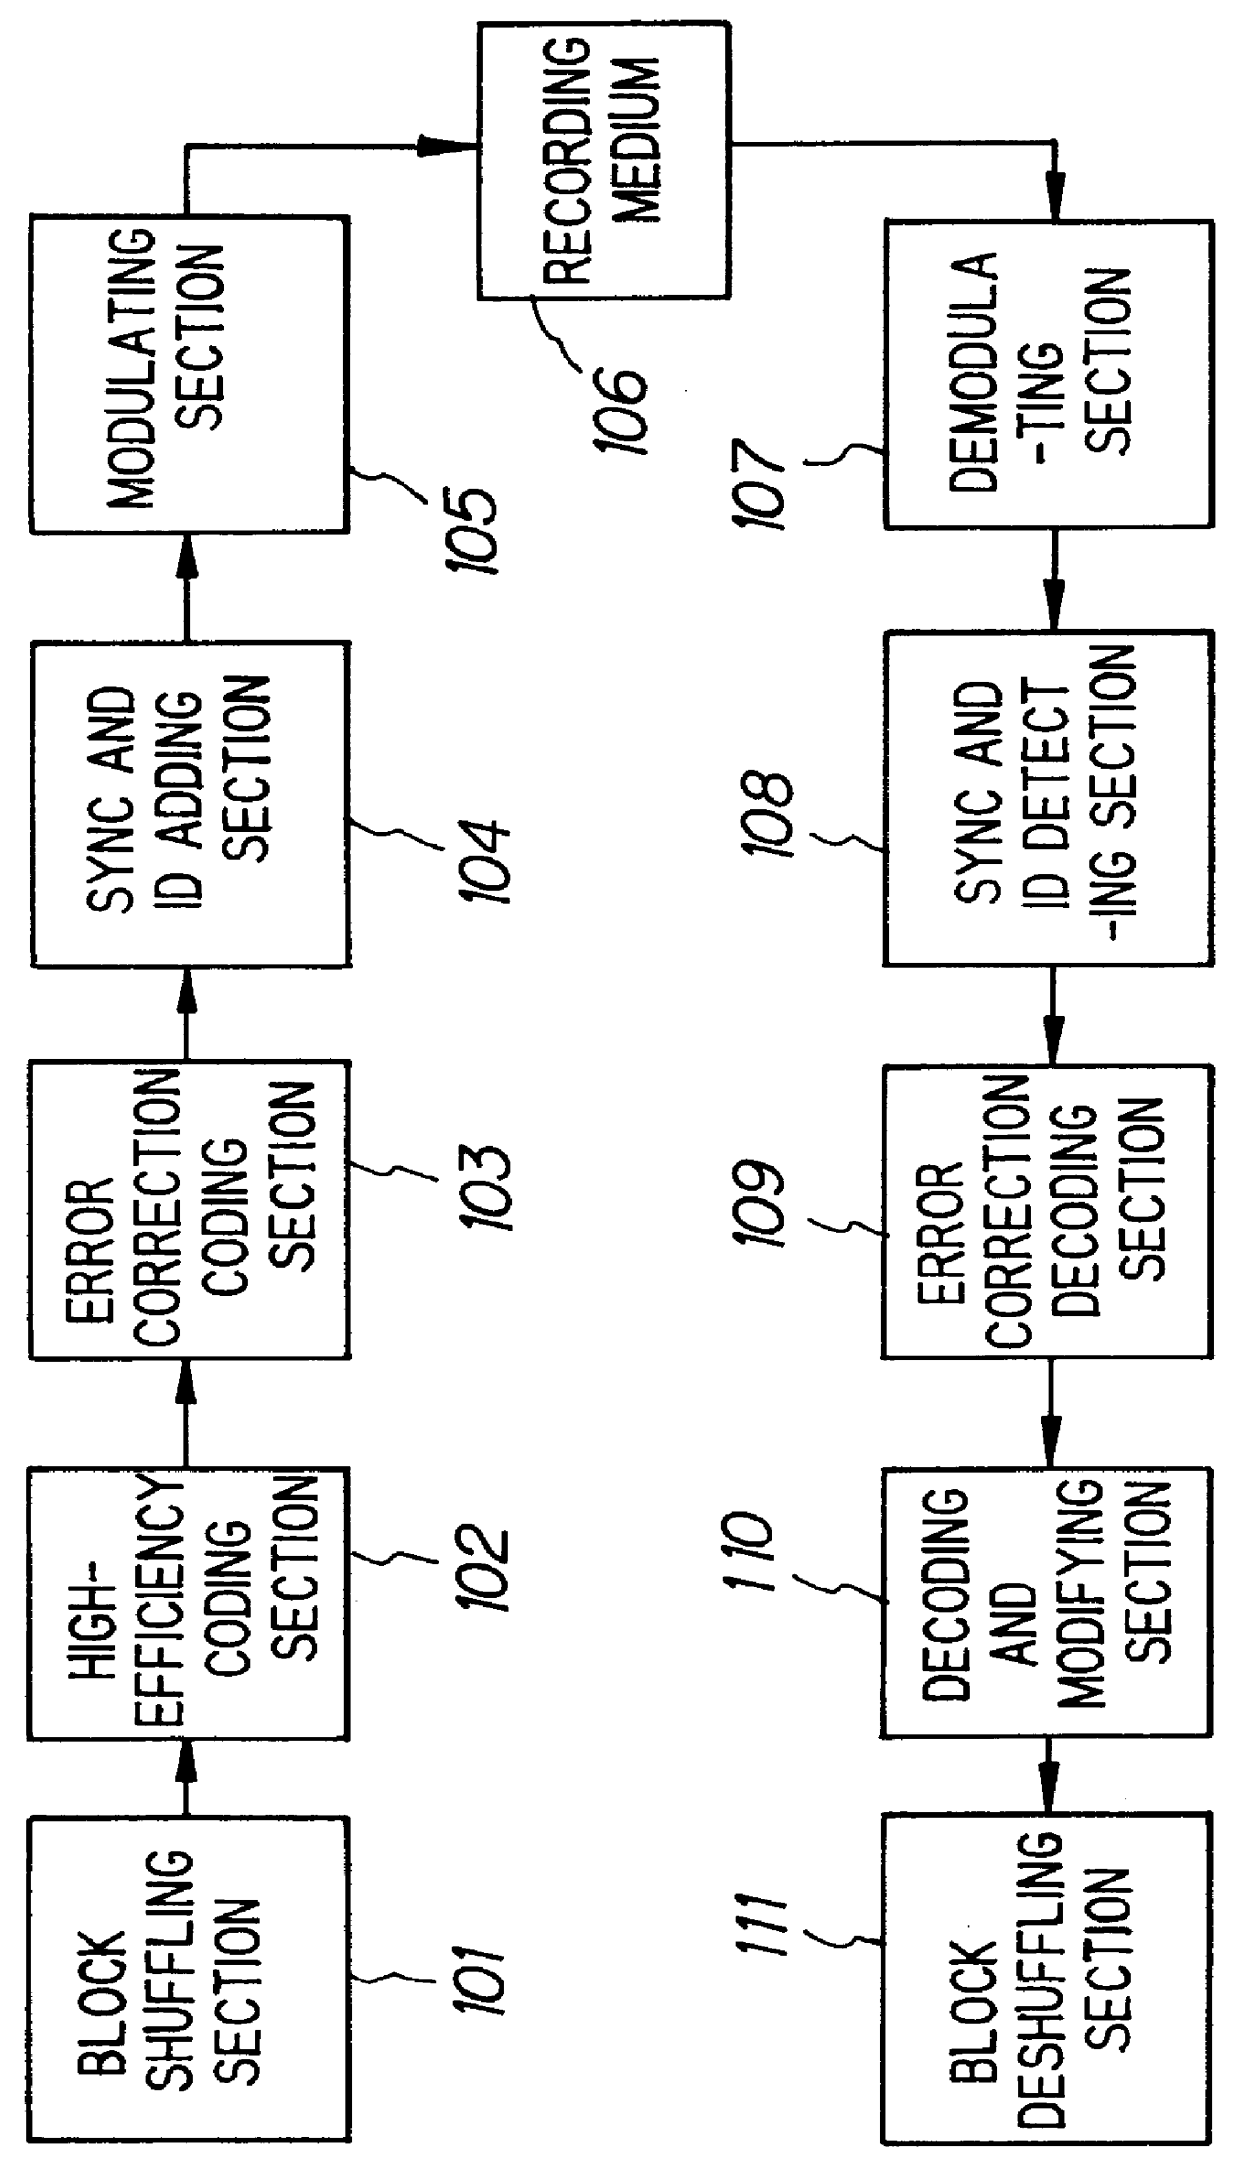 Digital recording and reproducing apparatus which multiplexes and records HDTV, SDTV and trick play data together on a magnetic tape